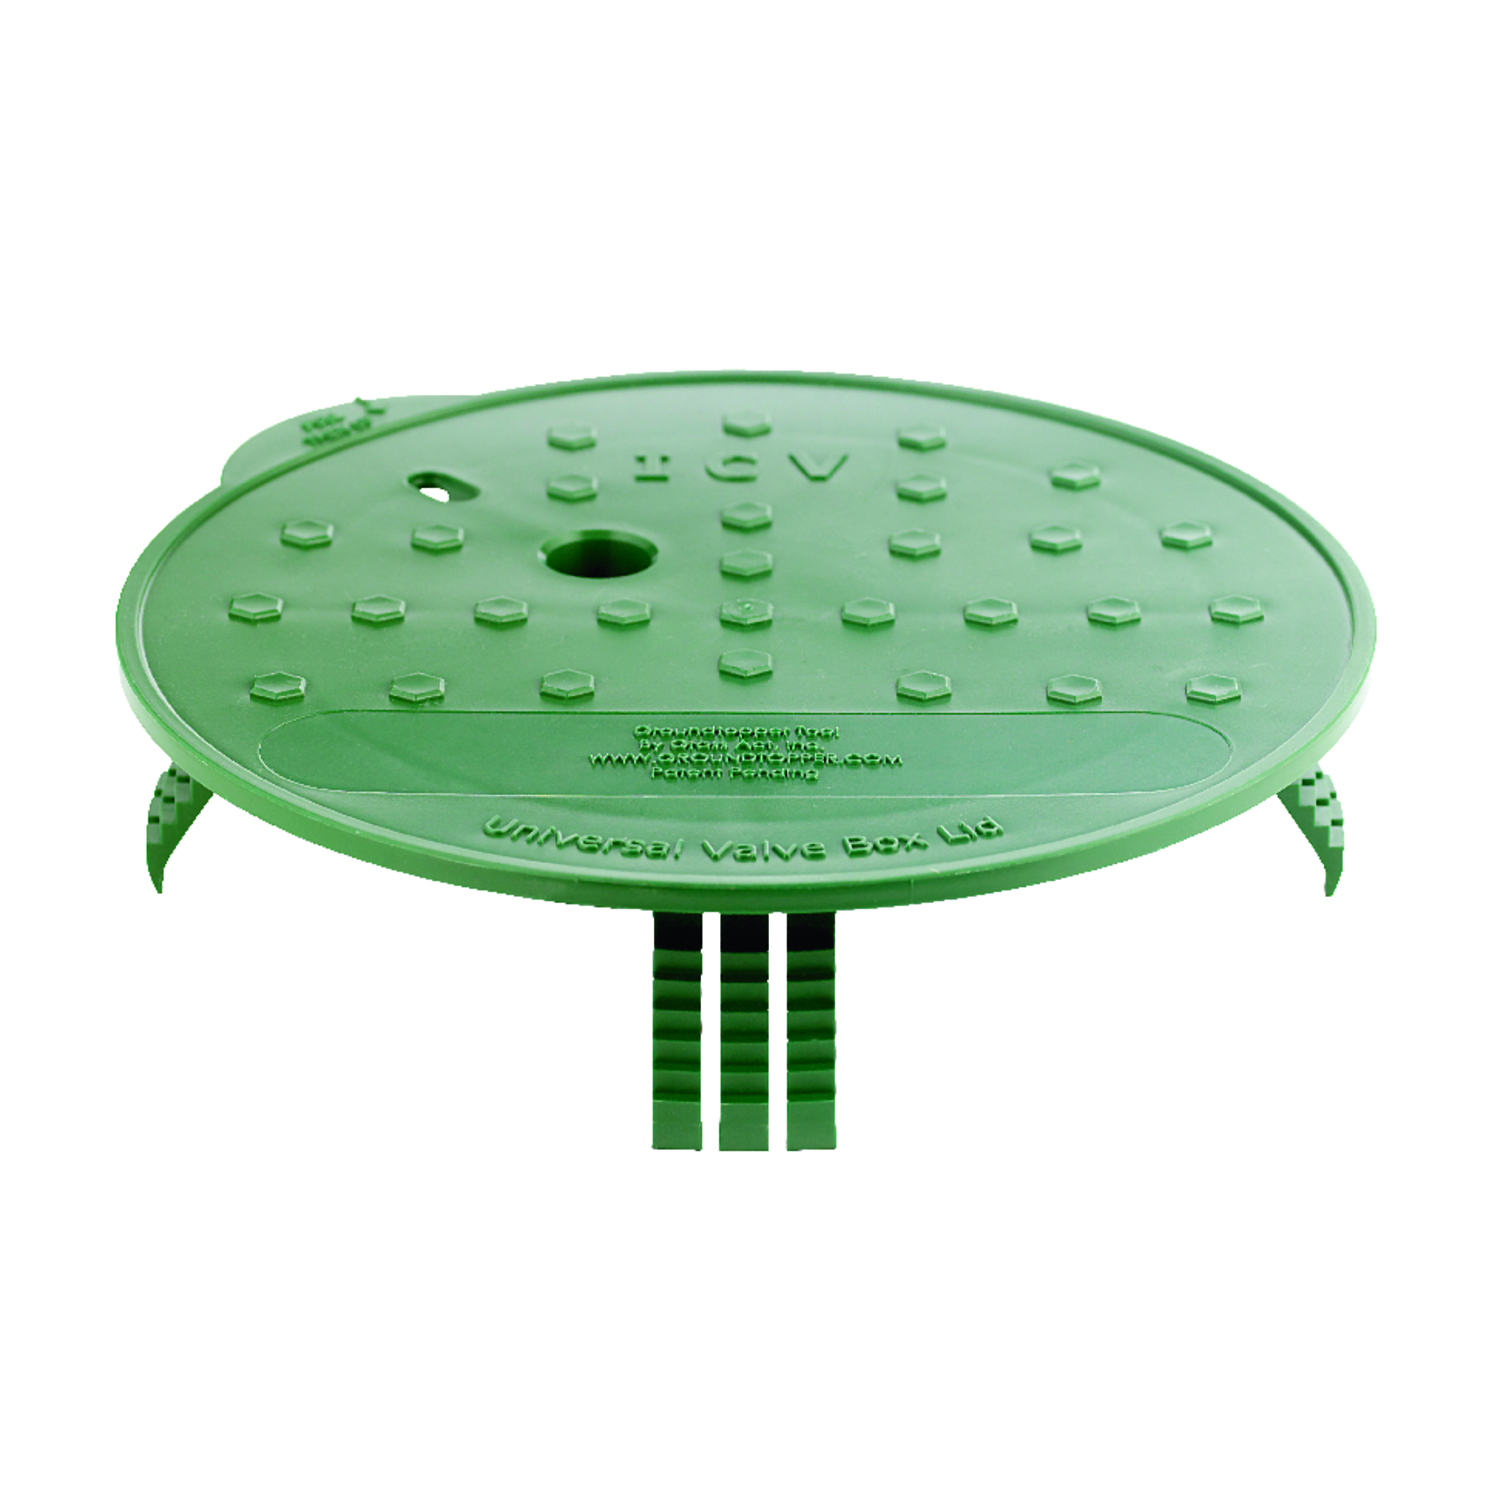 Photos - Other sanitary accessories Groundtopper 10 3/4 in. W X 2 3/8 in. H Round Valve Box Lid Green UNI10